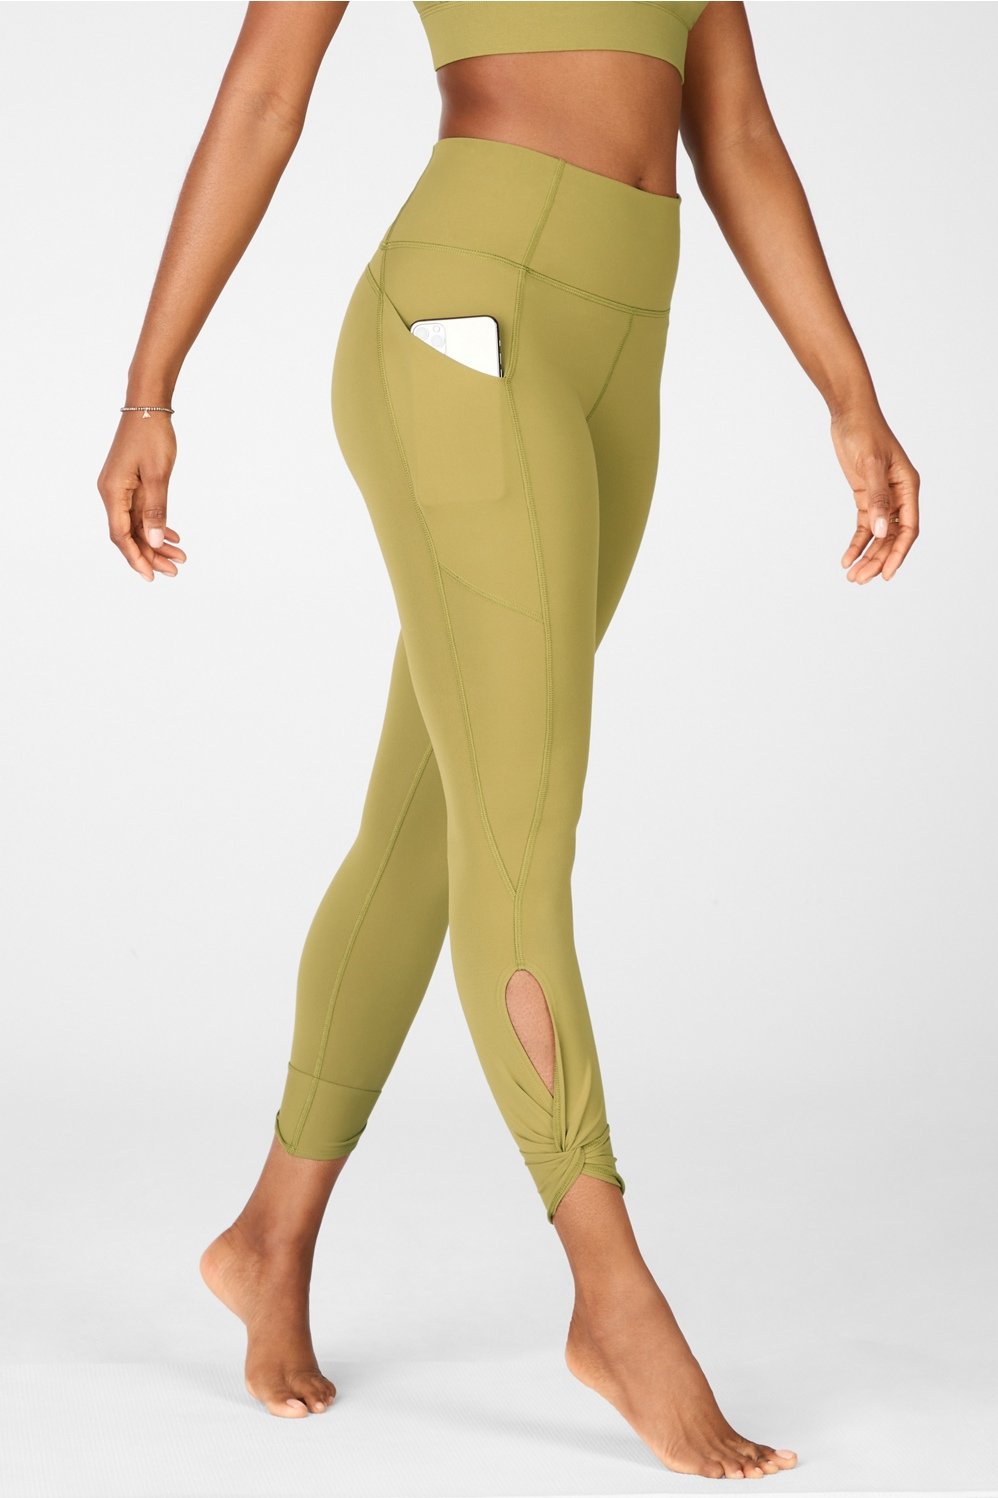 Oasis PureLuxe High-Waisted 7/8 Legging